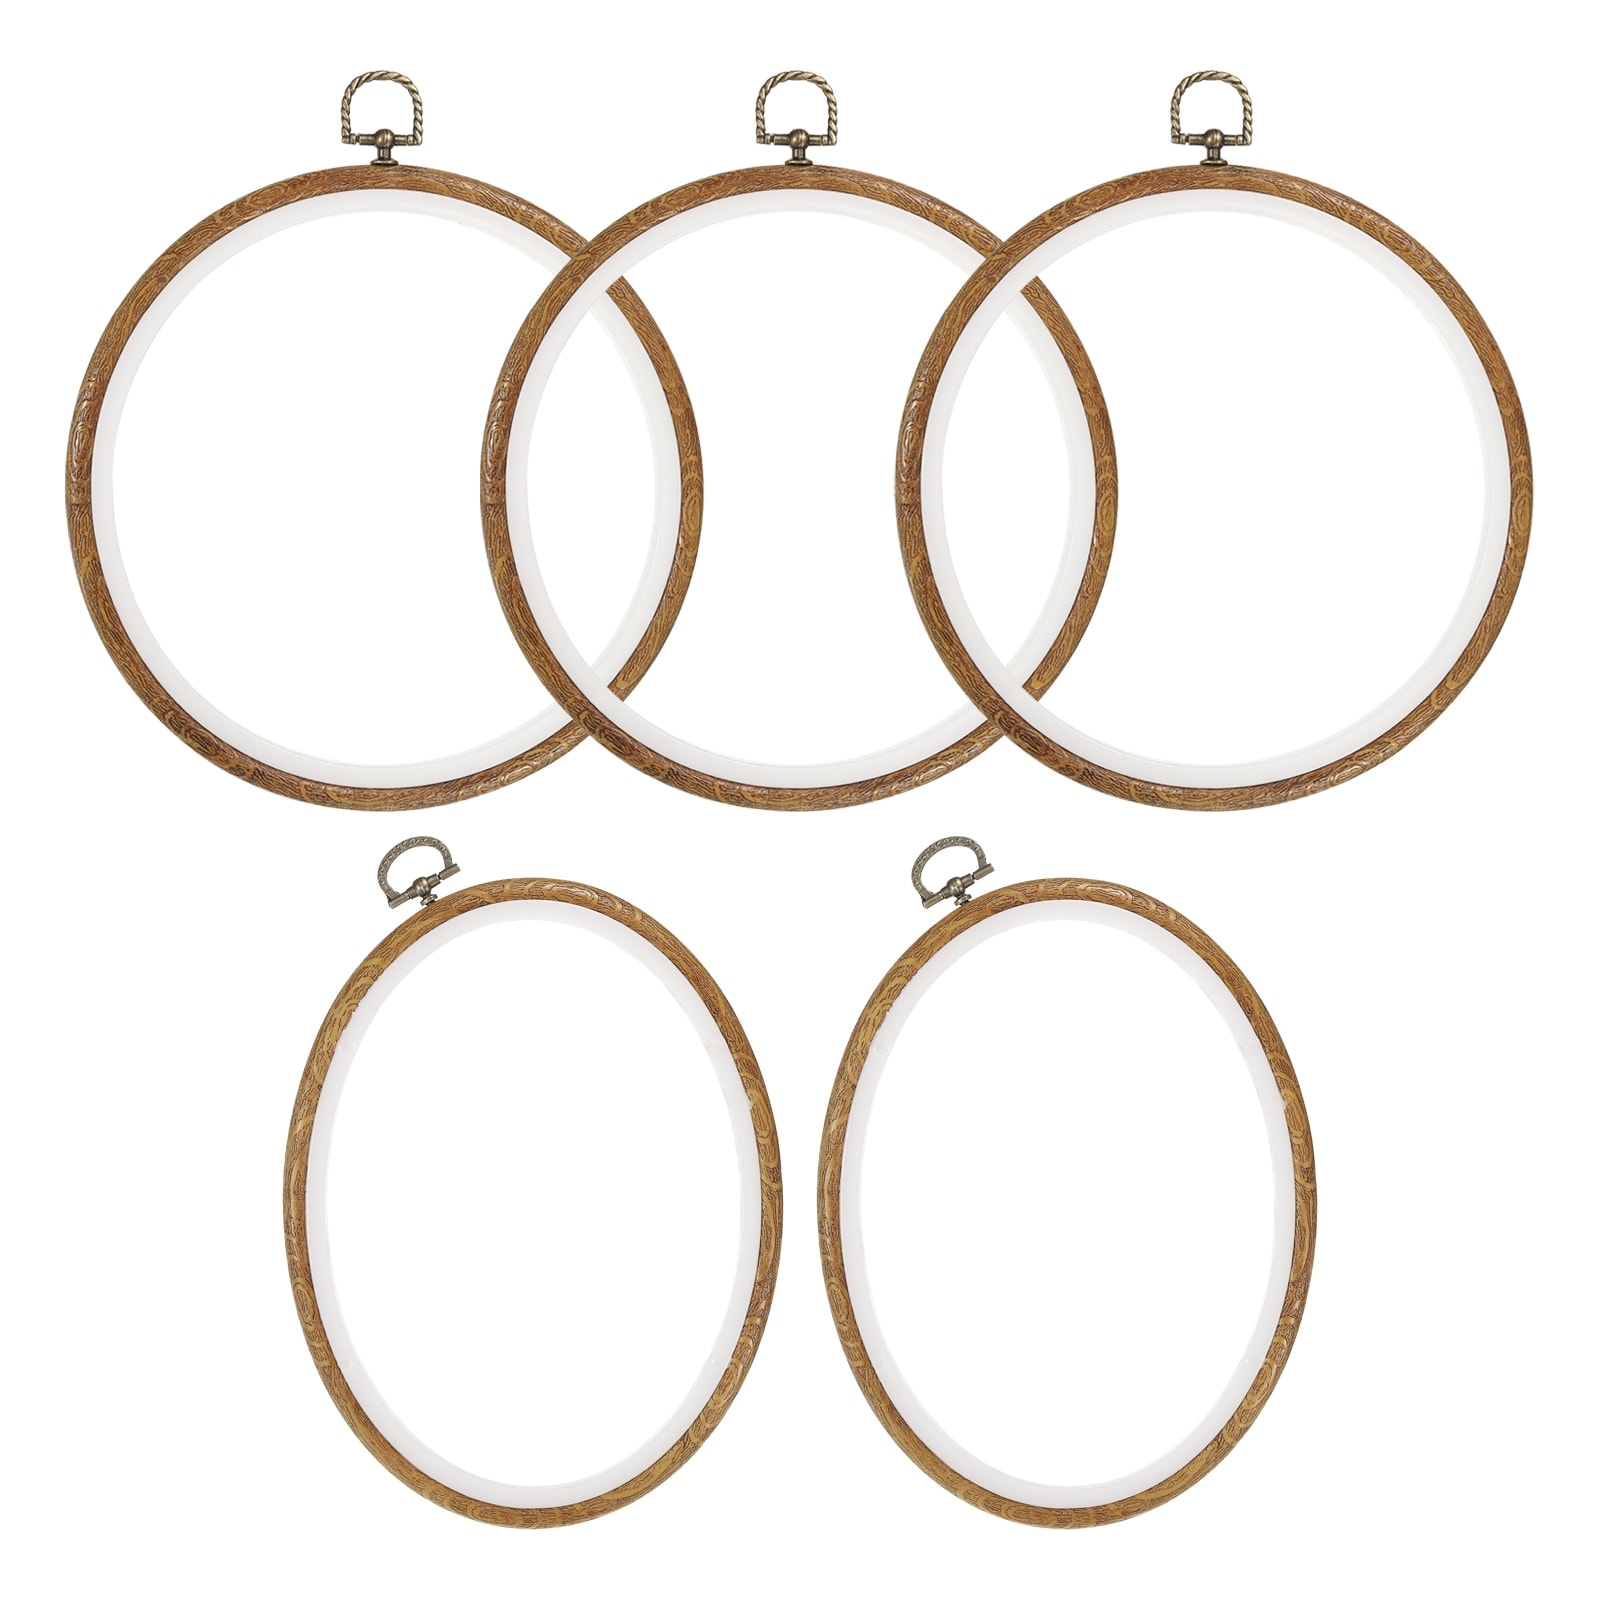 5Inch Embroidery Hoop Frame - Decorative Cross Stitch Display Frame, Round  Embroidery Hoops Circle Imitation Wood Craft Sewing Tools